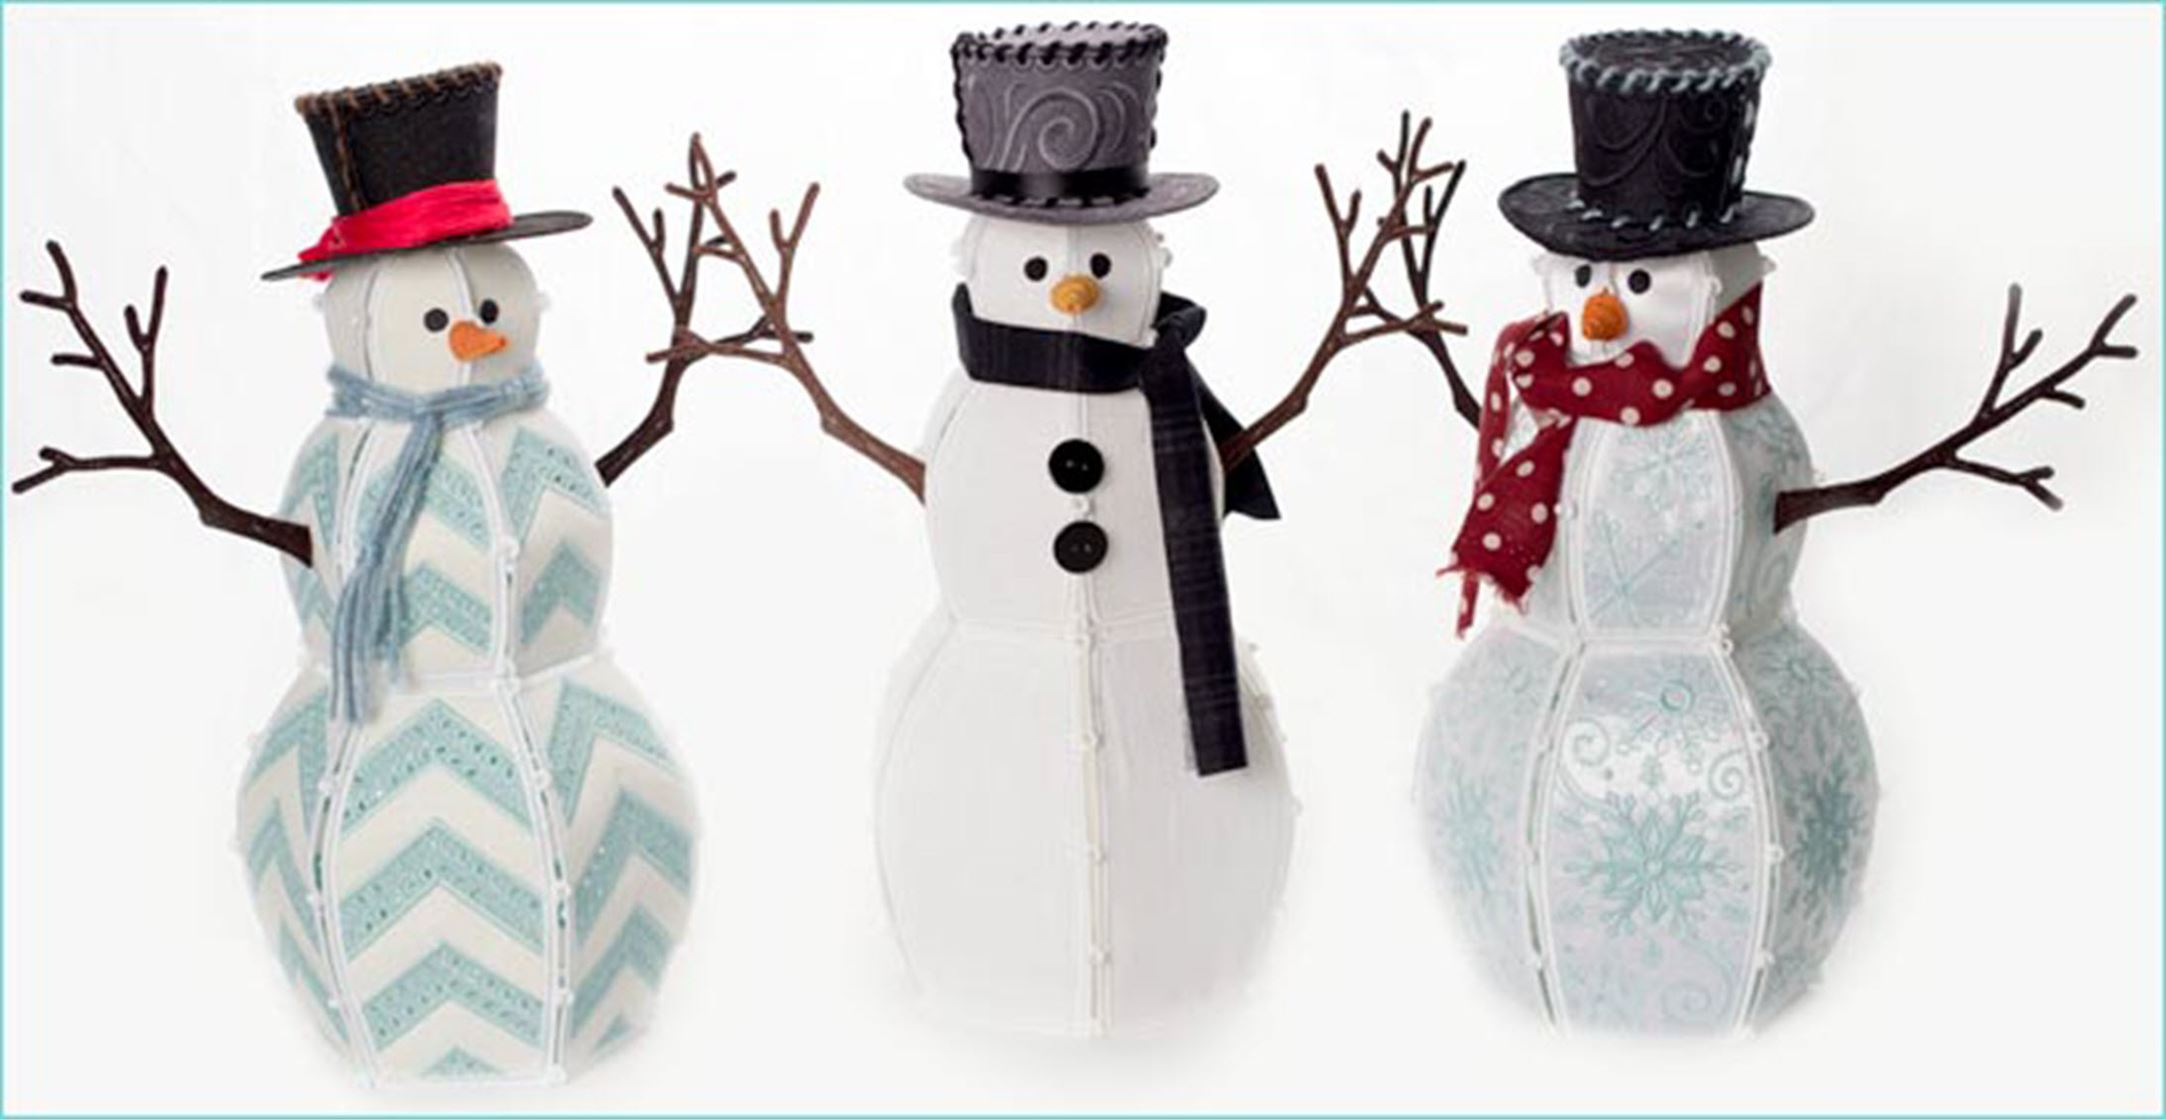 Let’s Build a Snowman: Freestanding Embroidered Snowman from OESD